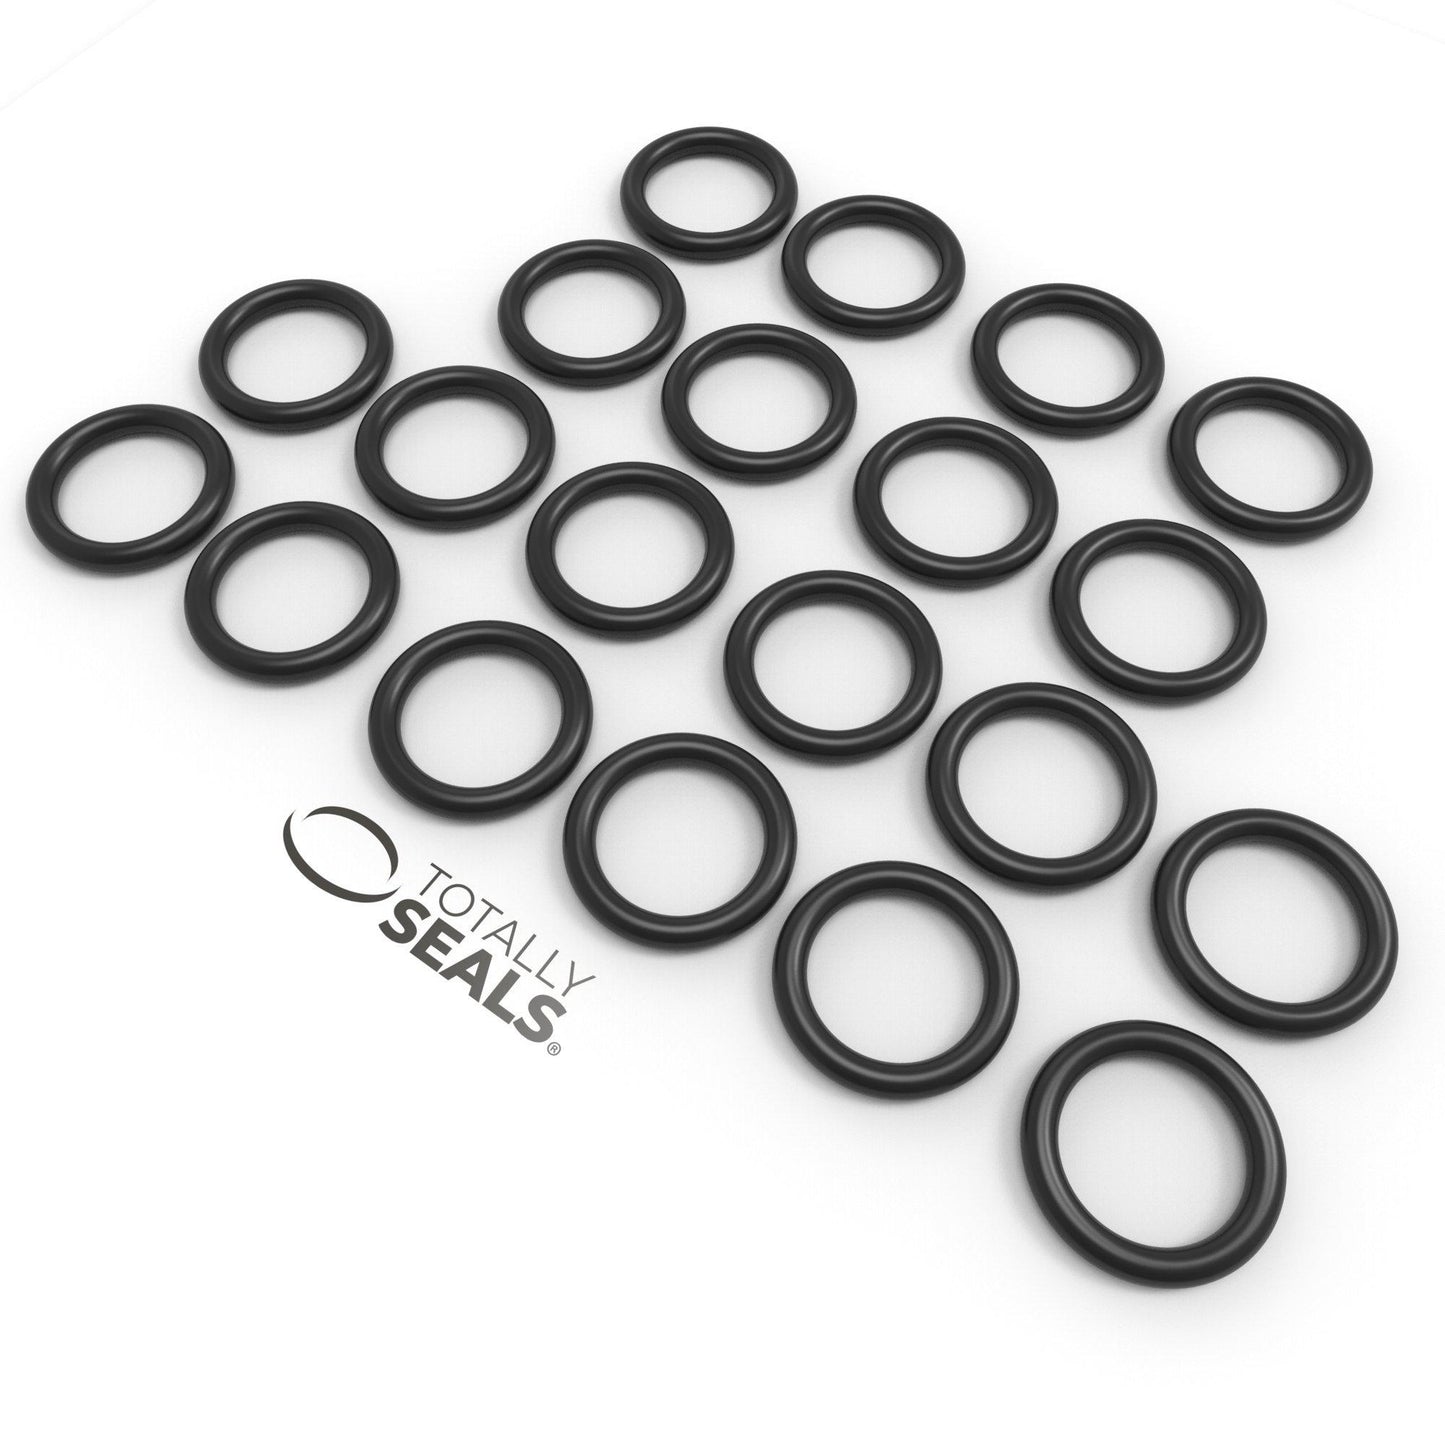 10mm x 1.5mm (13mm OD) Nitrile O-Rings - Totally Seals®